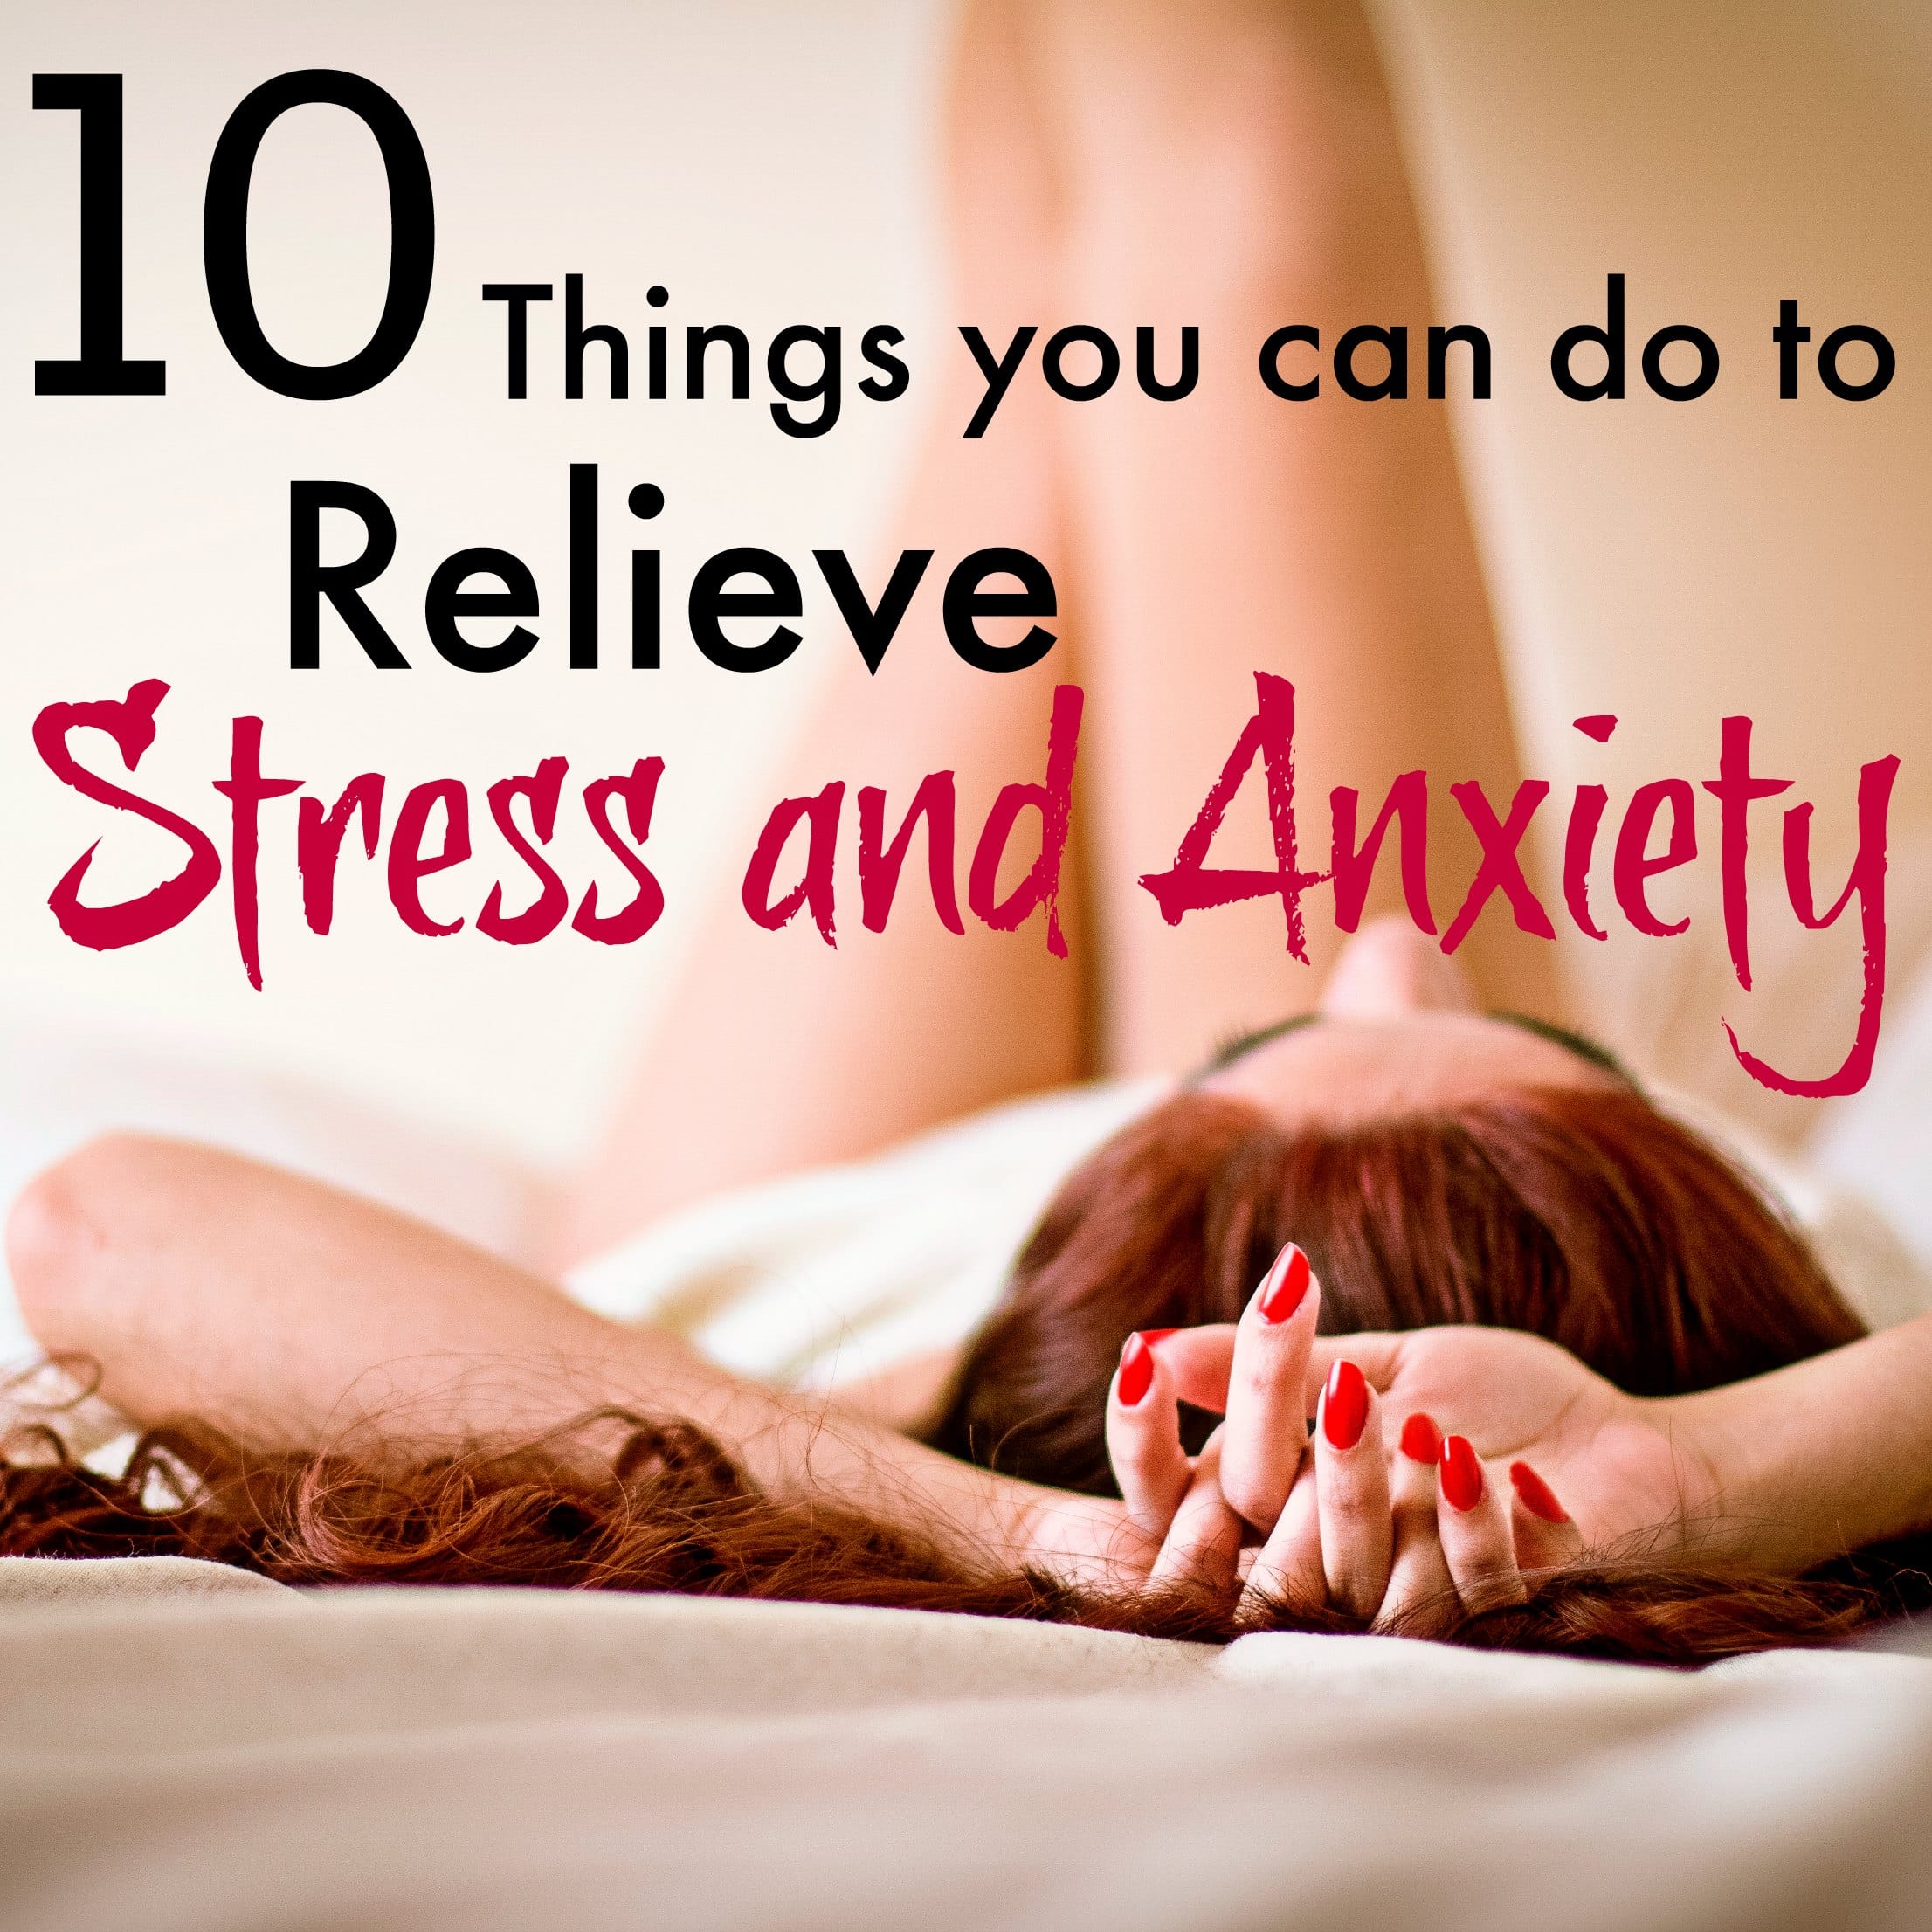 10 ways to relieve stress and anxiety